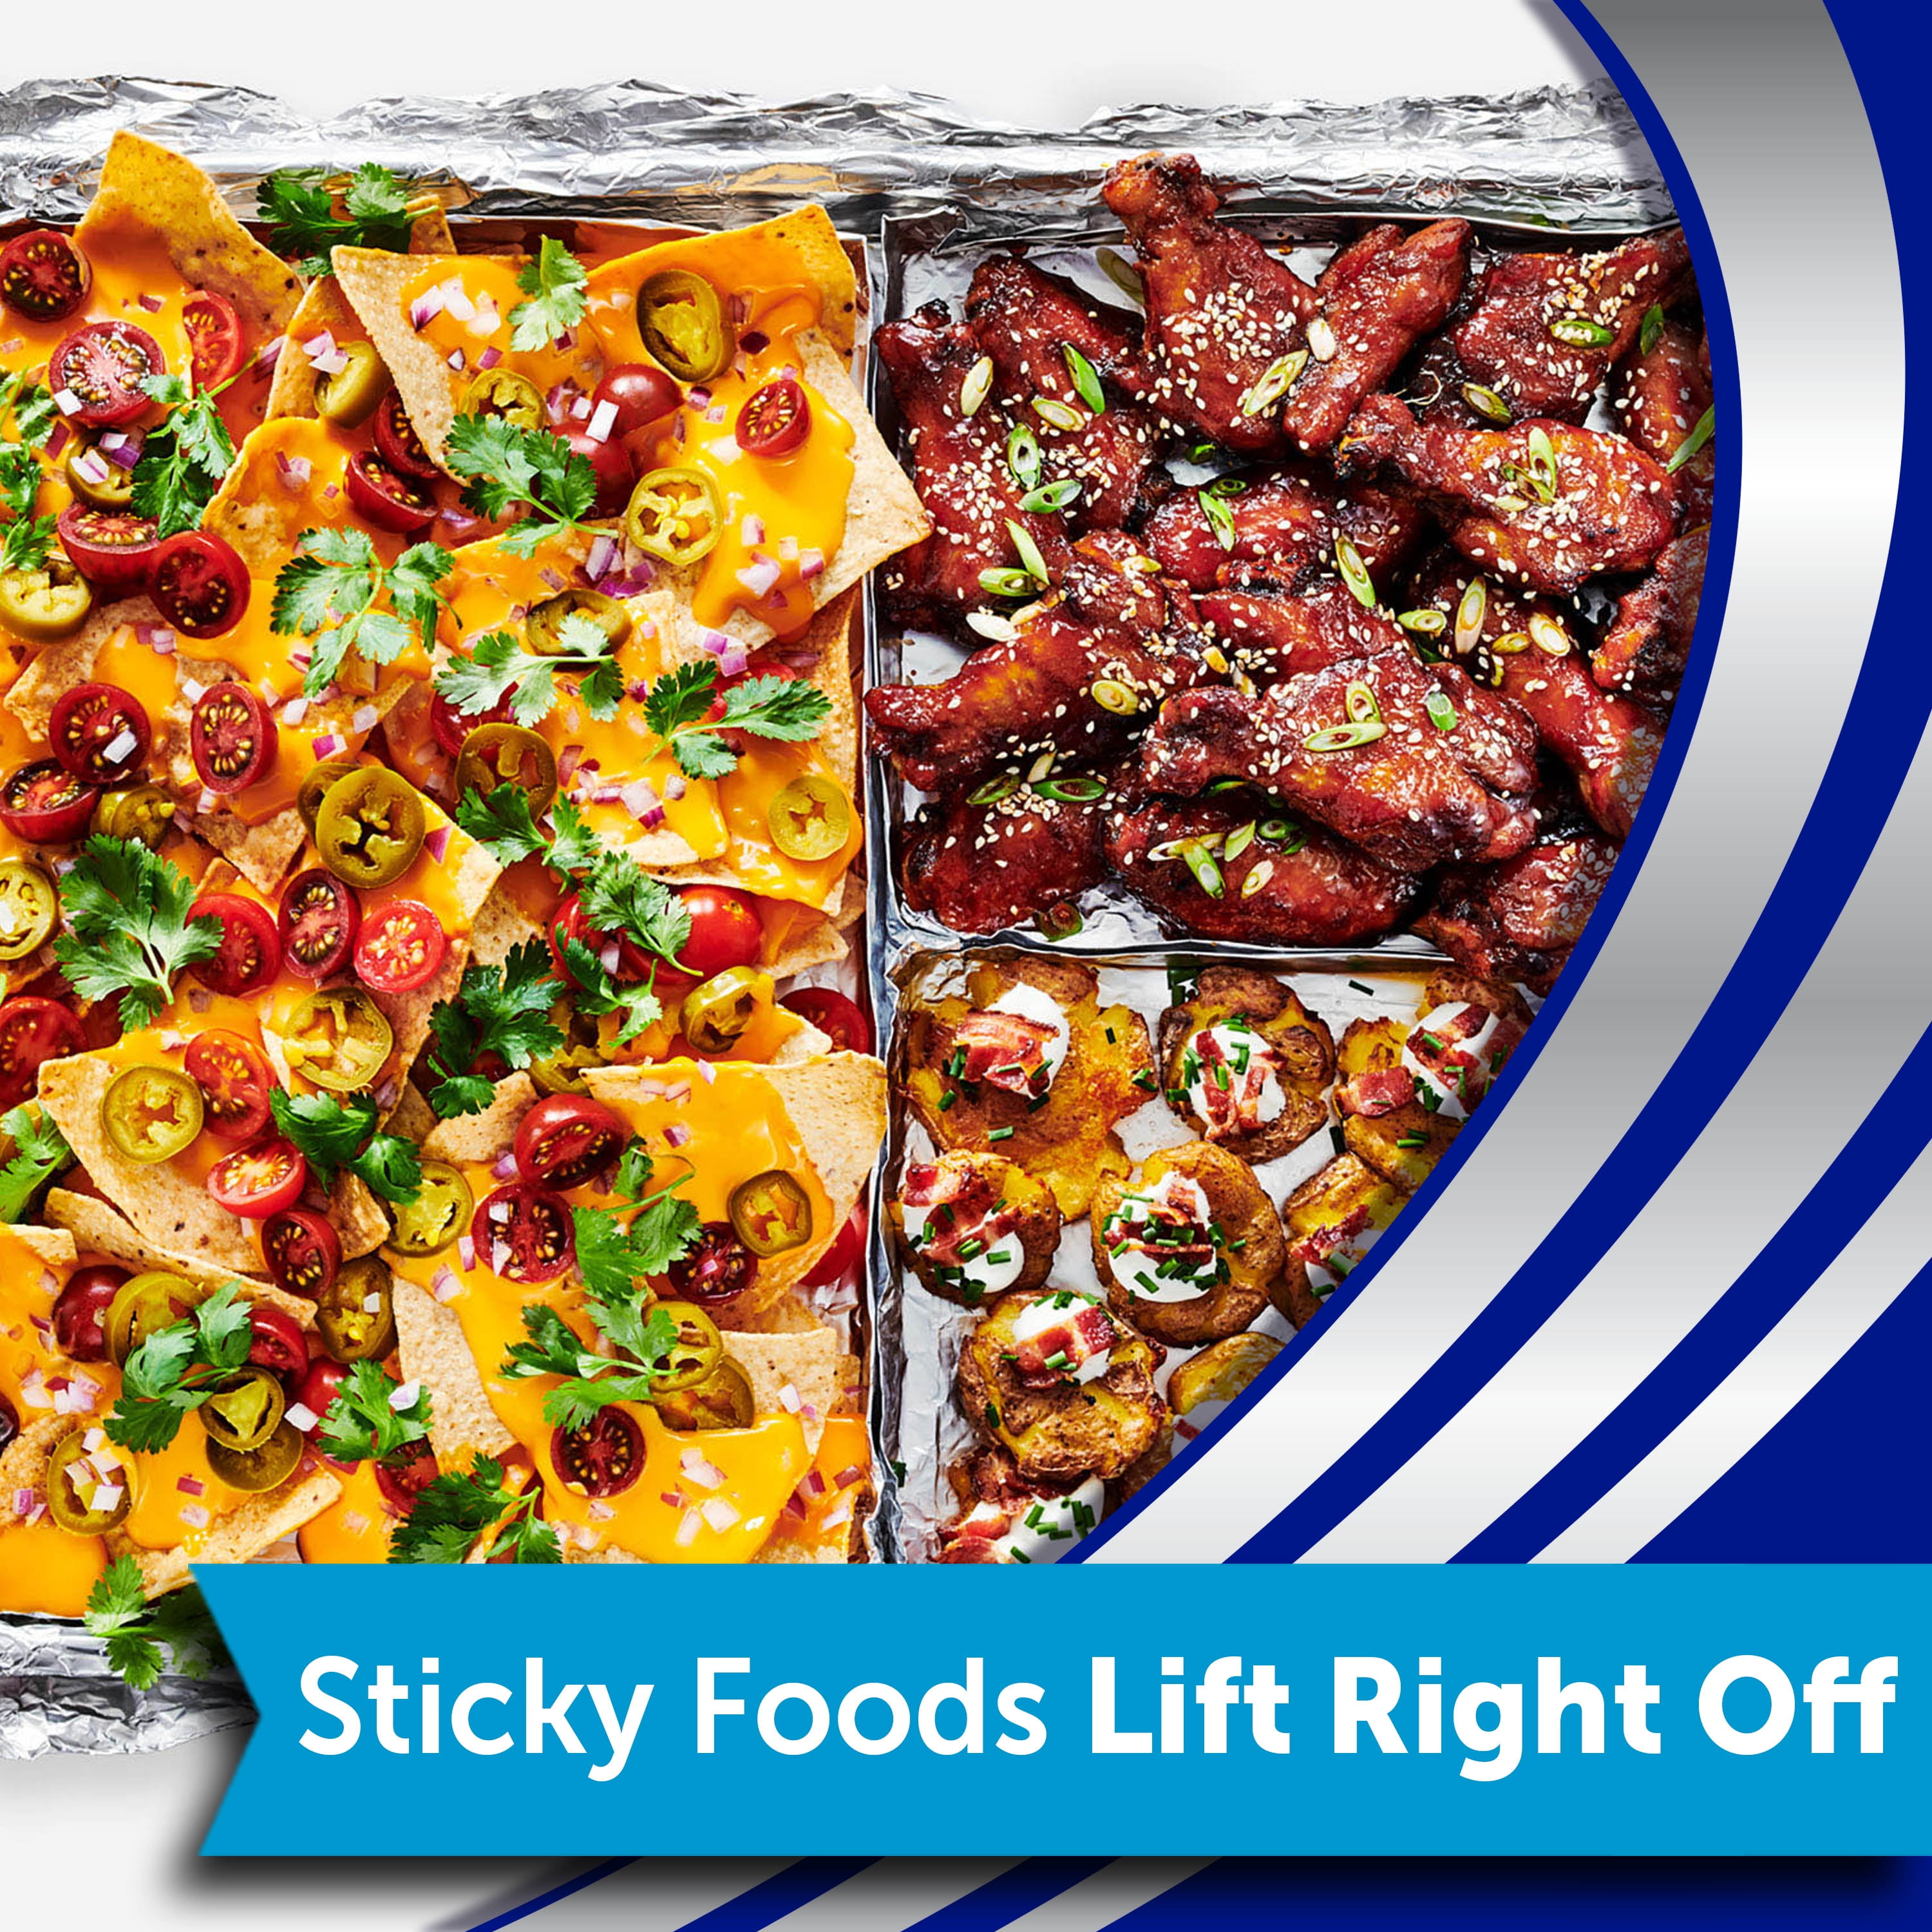 Avoid Sticky Situations with Reynolds Wrap® Non-Stick Aluminum